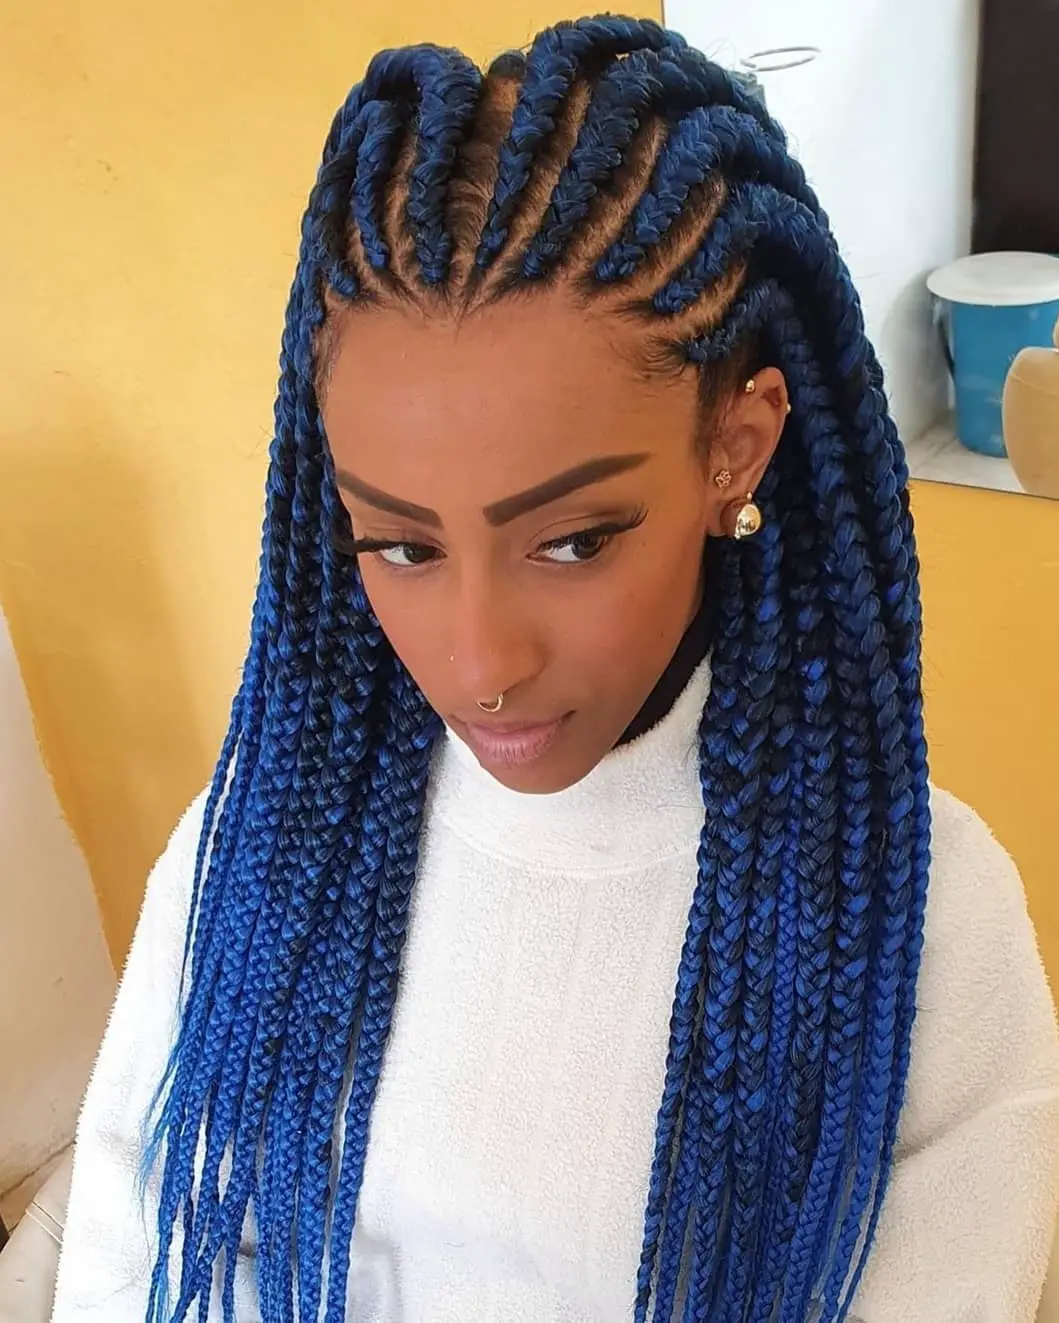 2021 Braided Hairstyles: Amazing Braid Styles To Check Out